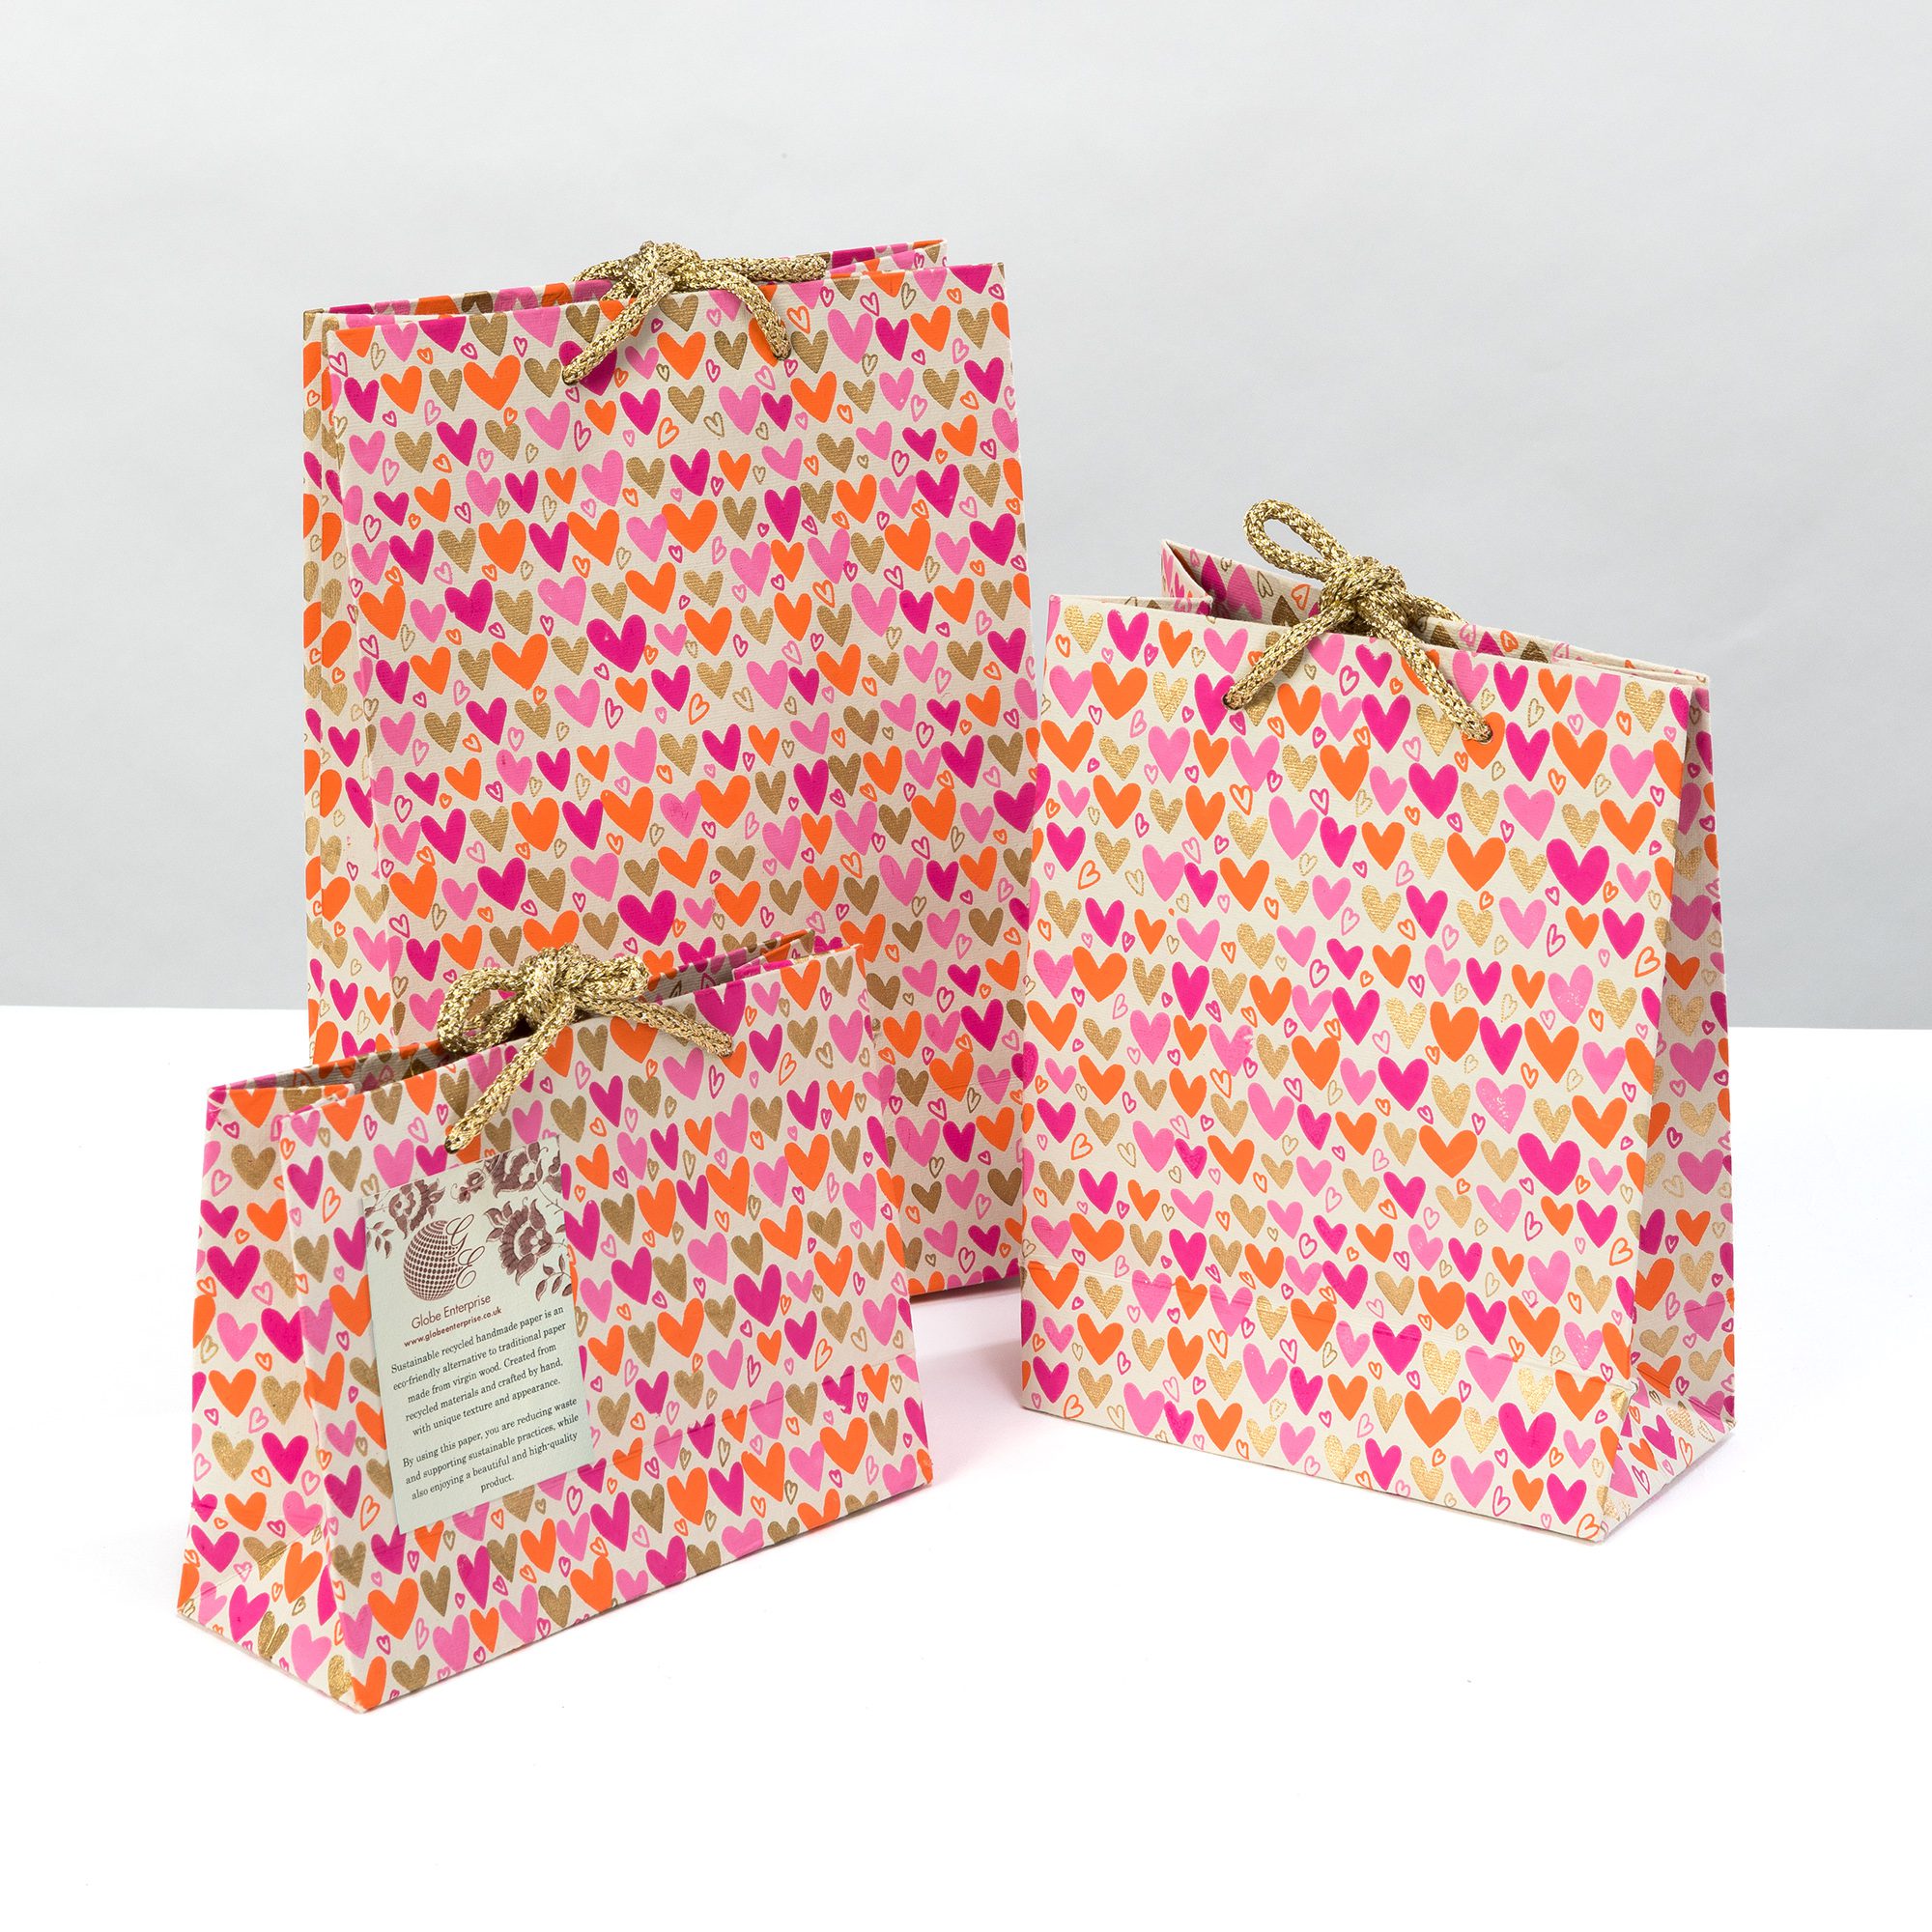 Heart print Gift bags are eco-friendly gift bags that seamlessly blend bold colours and intricate patterns